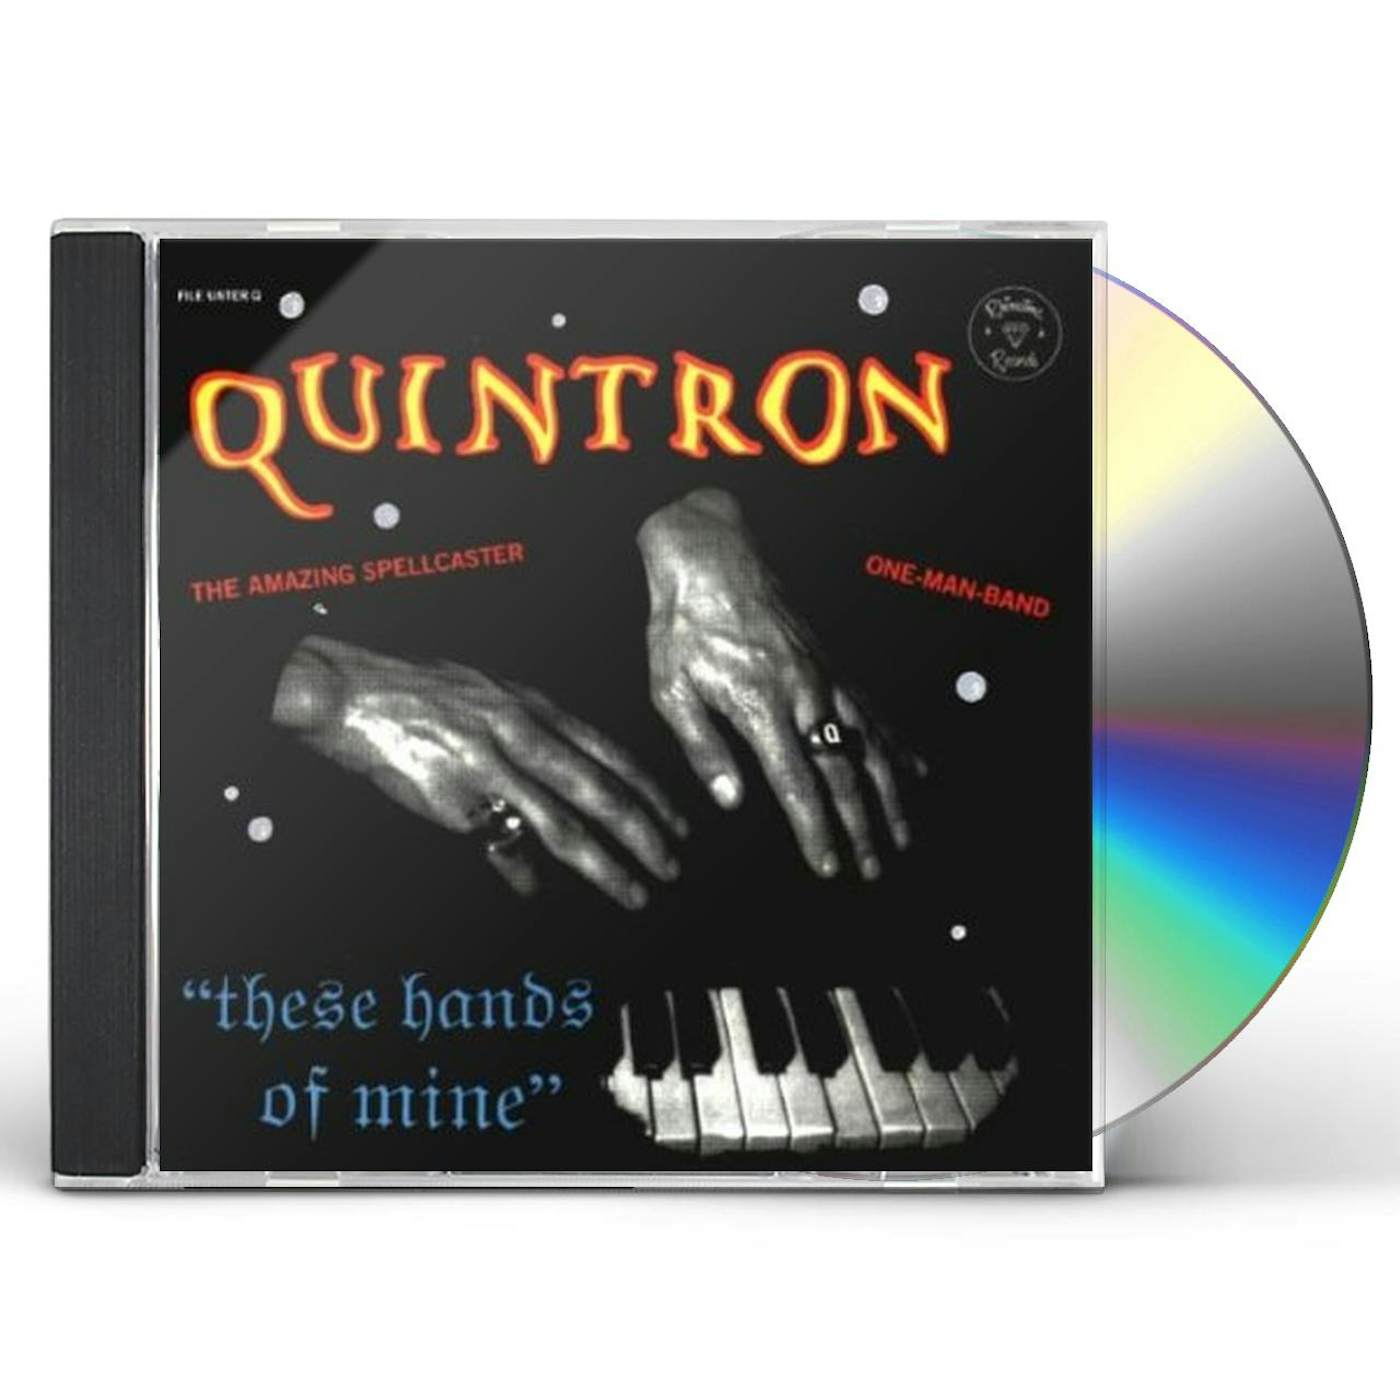 Quintron THESE HANDS OF MINE CD